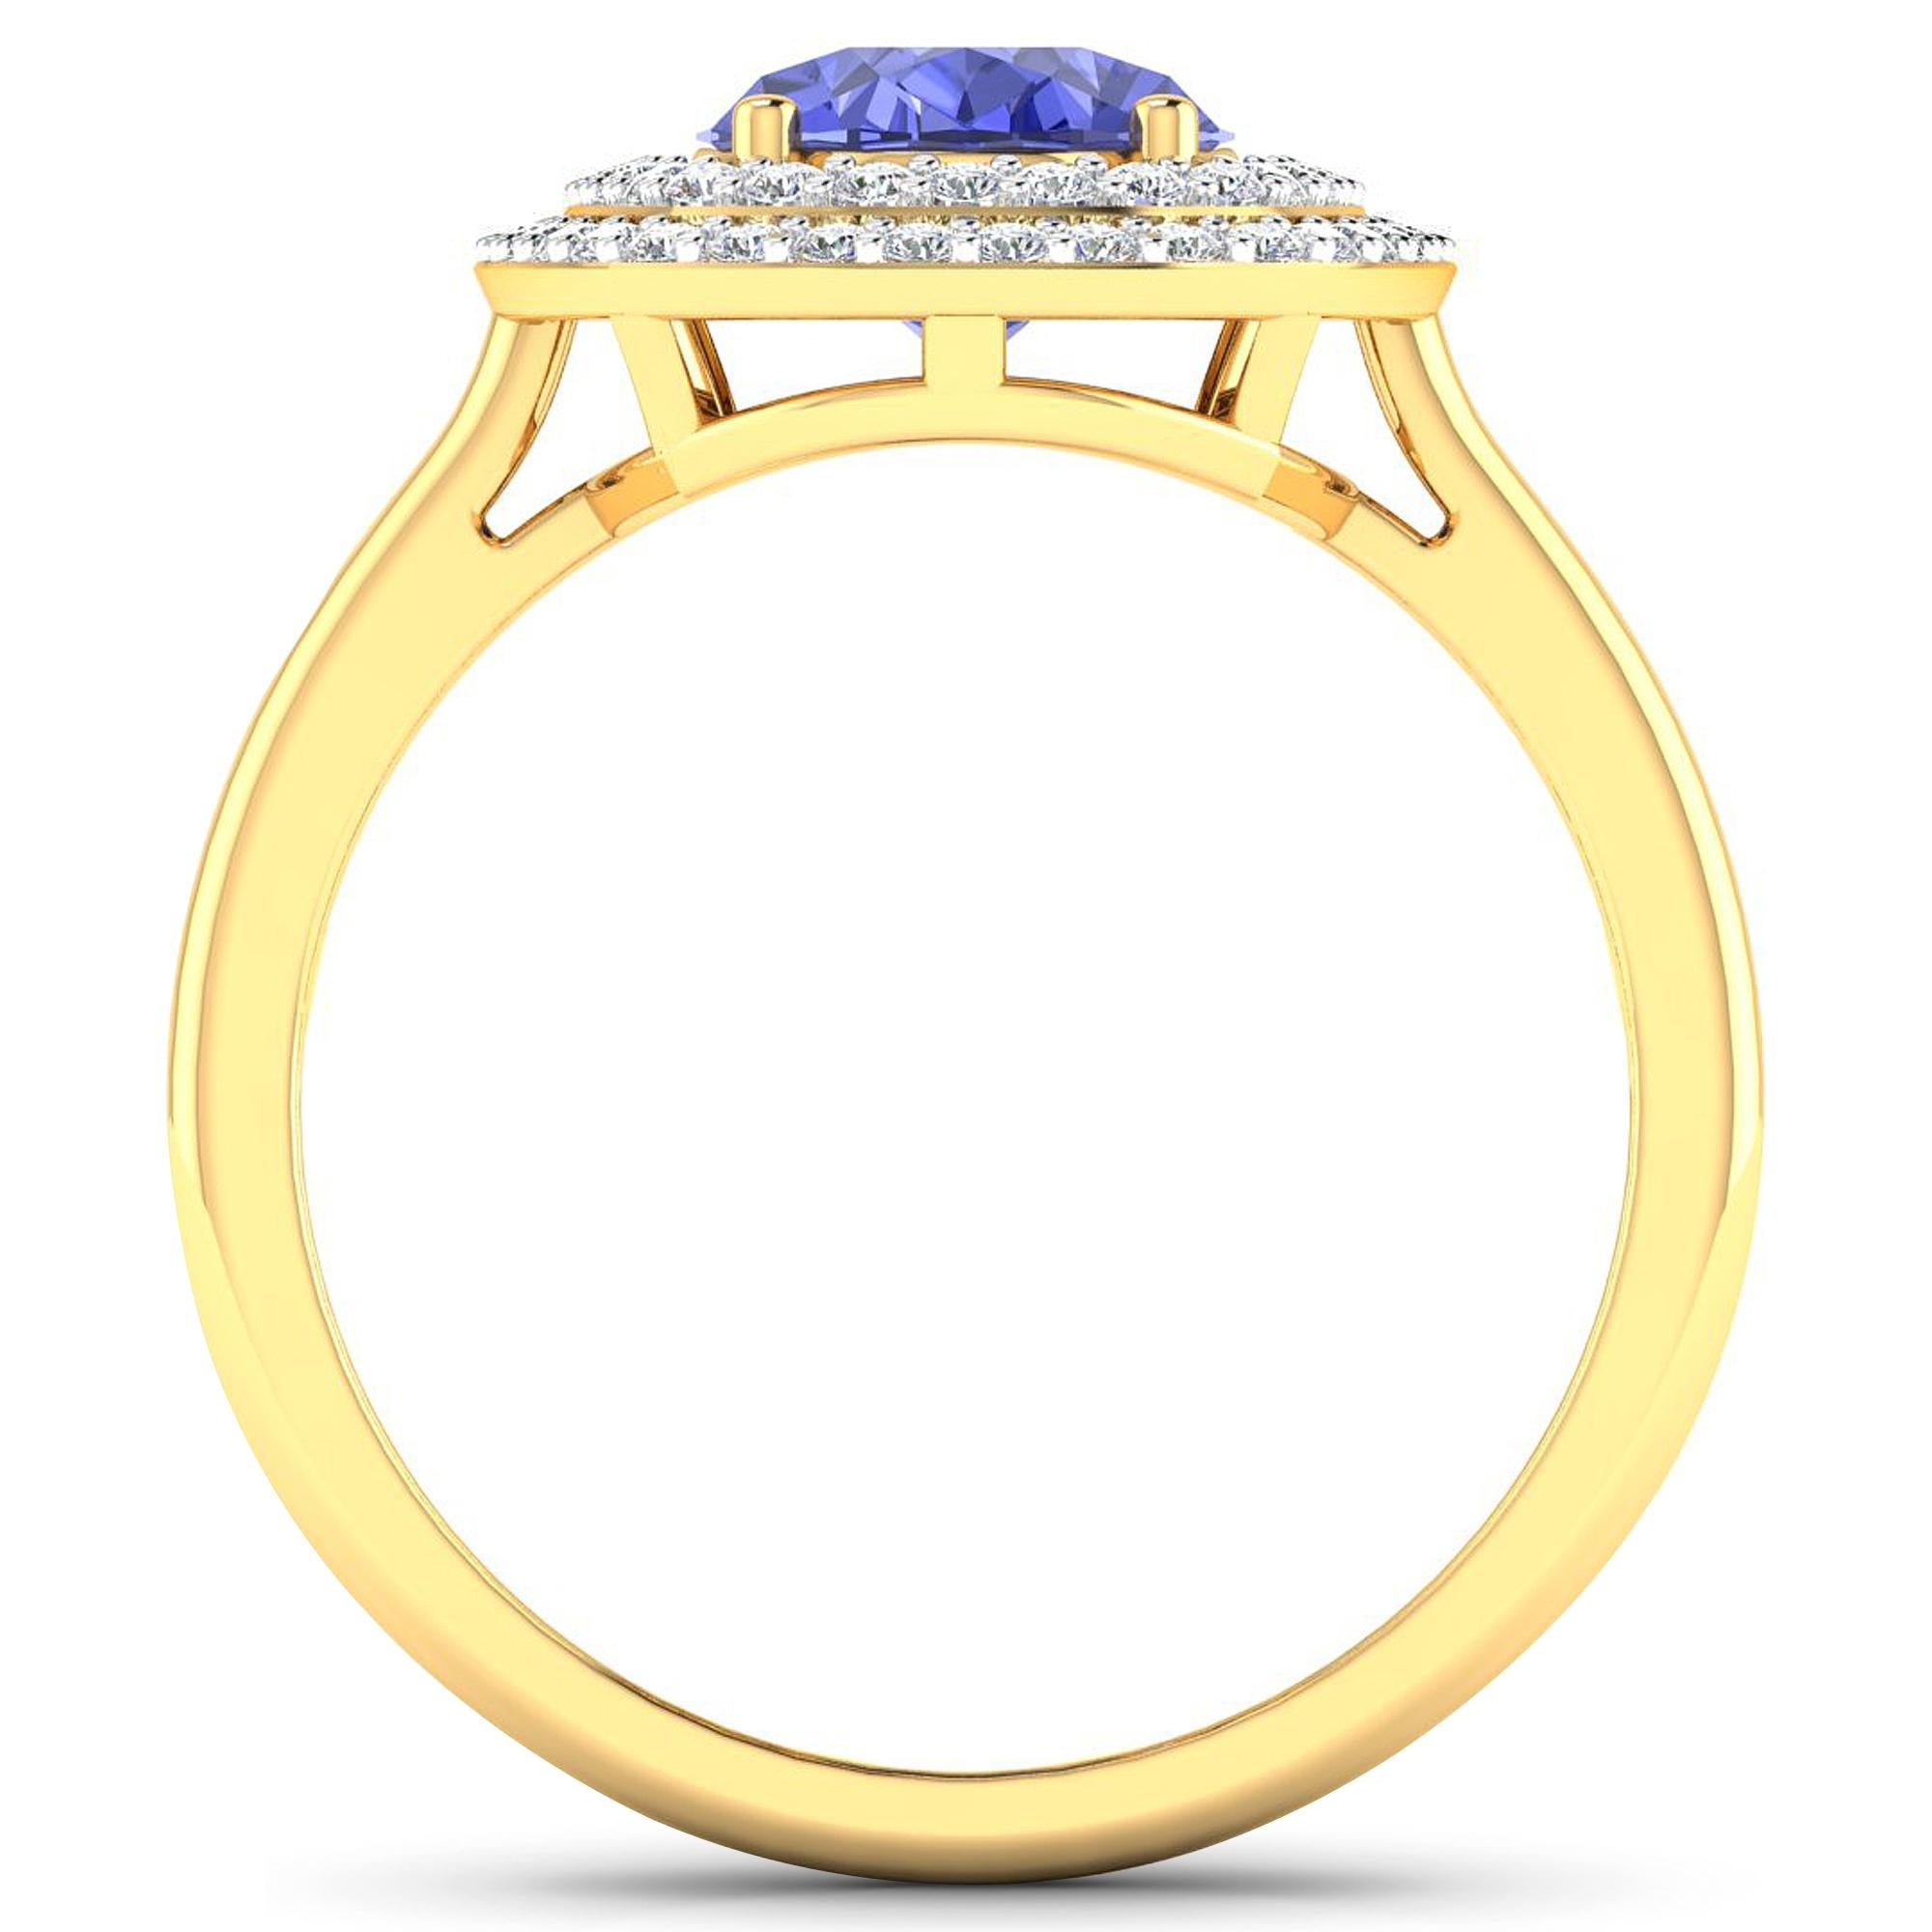 Tanzanite Gold Ring, 14Kt Gold Tanzanite & Diamond Engagement Ring, 1.88ctw.

Flaunt yourself with these 14K Yellow Gold Tanzanite & White Diamond Engagement Ring. The setting is inlaid with 62 accented full-cut White Diamond round stones for a